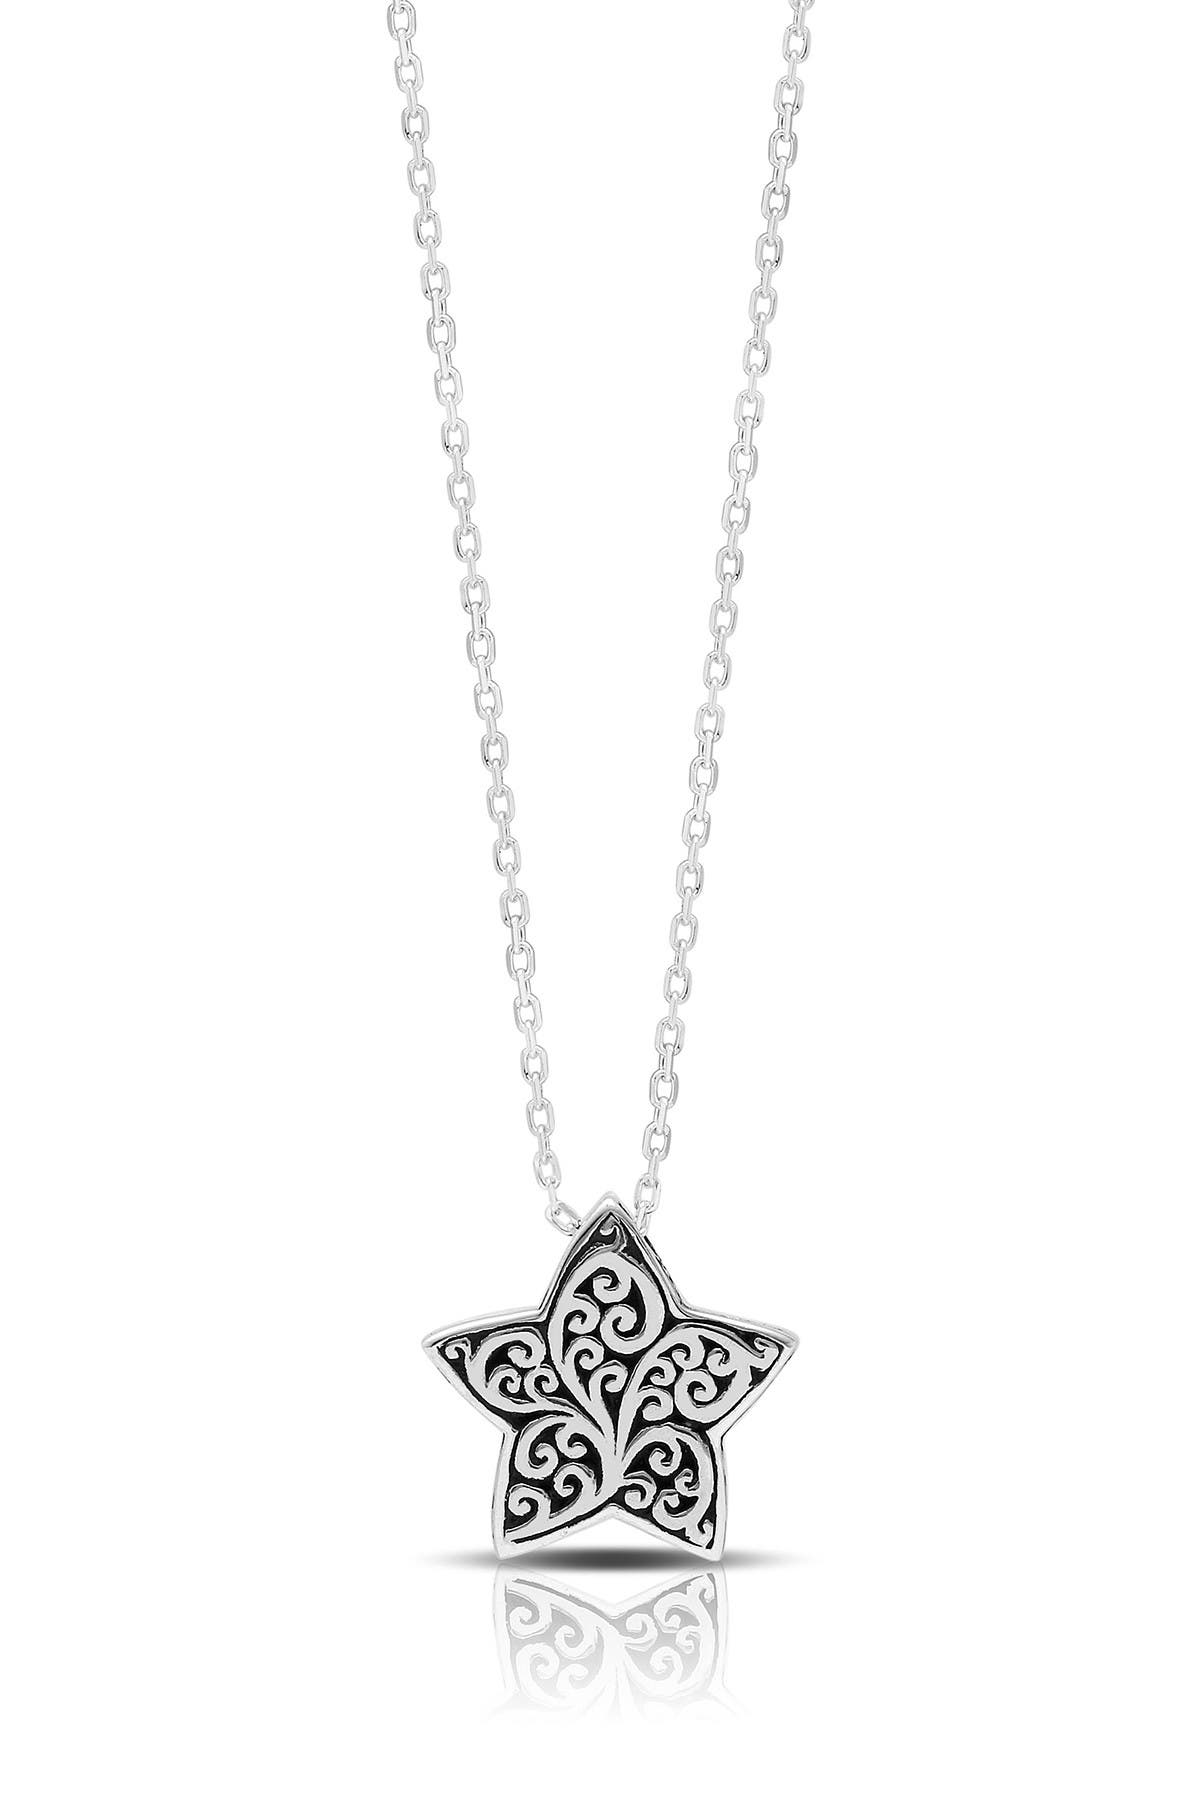 Lois Hill Sterling Silver Scroll Flat Star Pendant Necklace